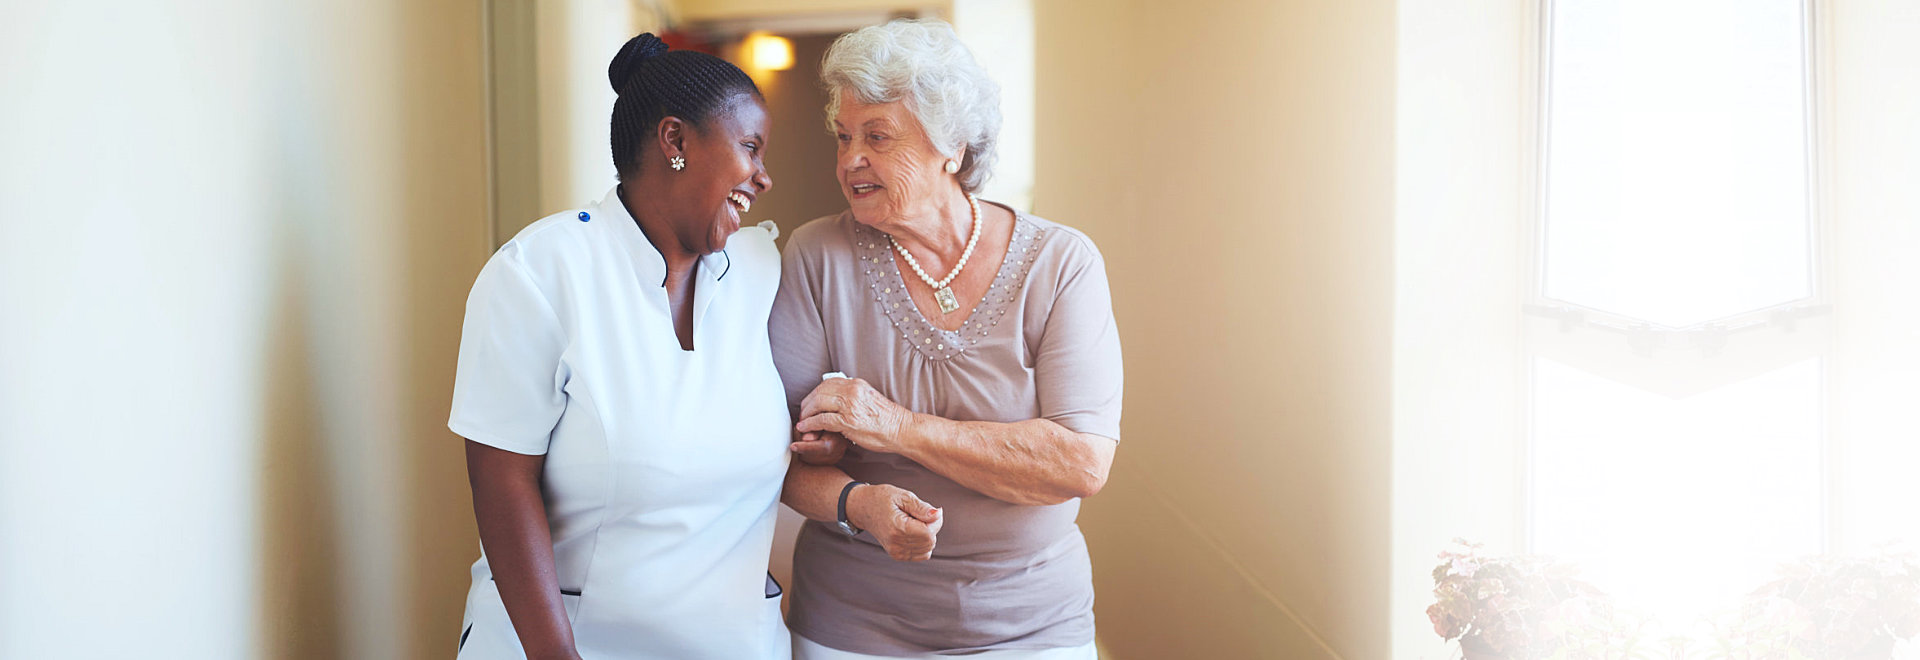 caregiver and an elderly woman smiling